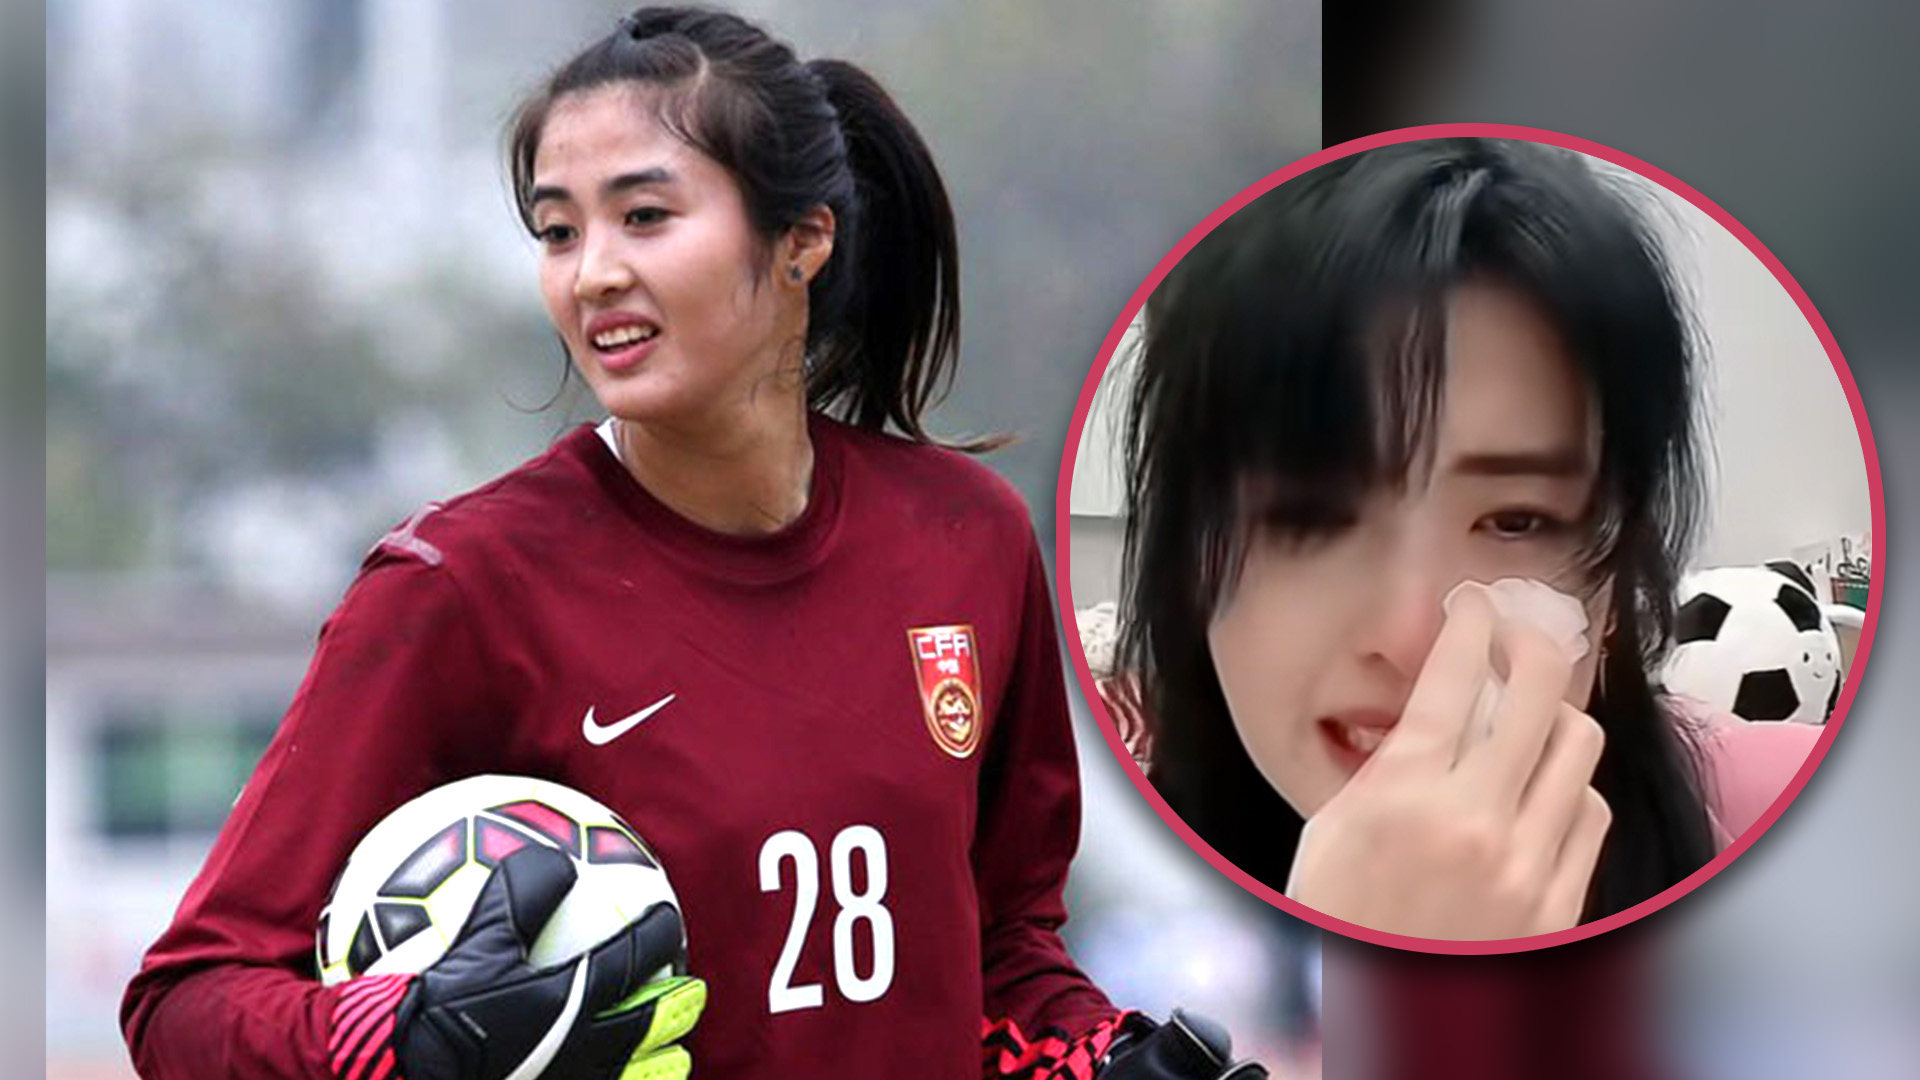 A retired player from China’s national football team was overcome with emotion during a live-streaming session after some viewers accused her of stealing charitable funds. Photo: SCMP composite/Baidu/Douyin